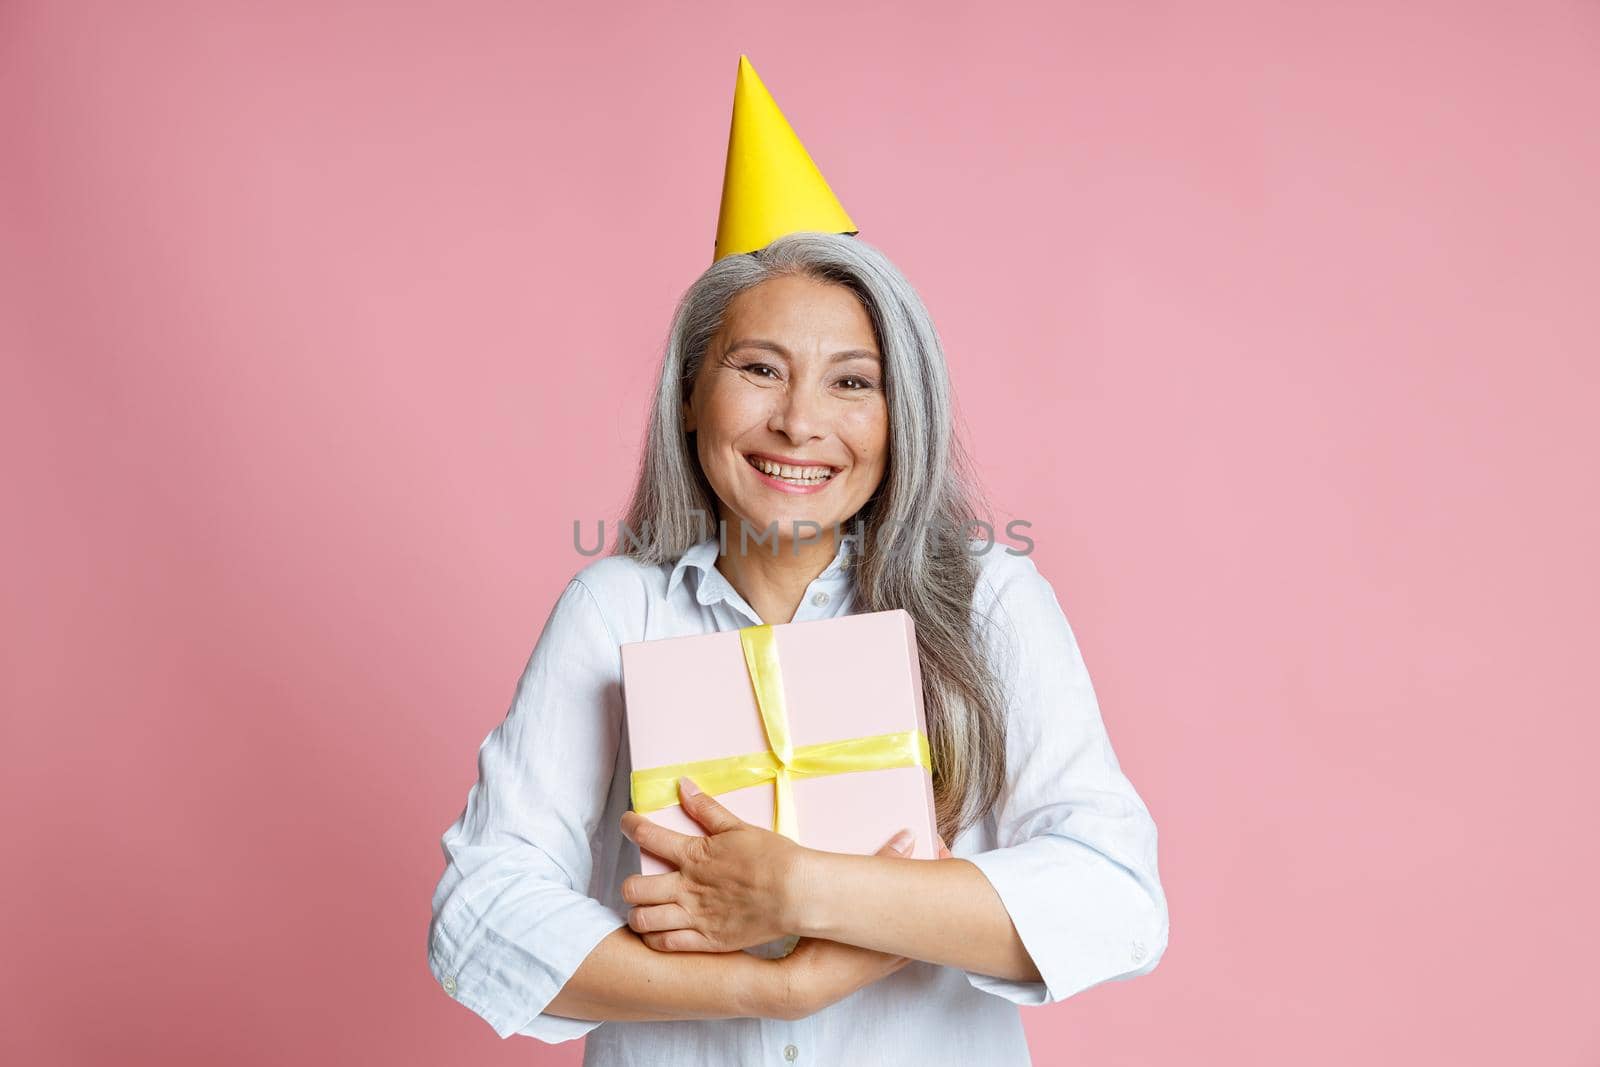 Joyful middle aged Asian lady with long hoary hair and bright party hat holds gift box standing on pink background in studio